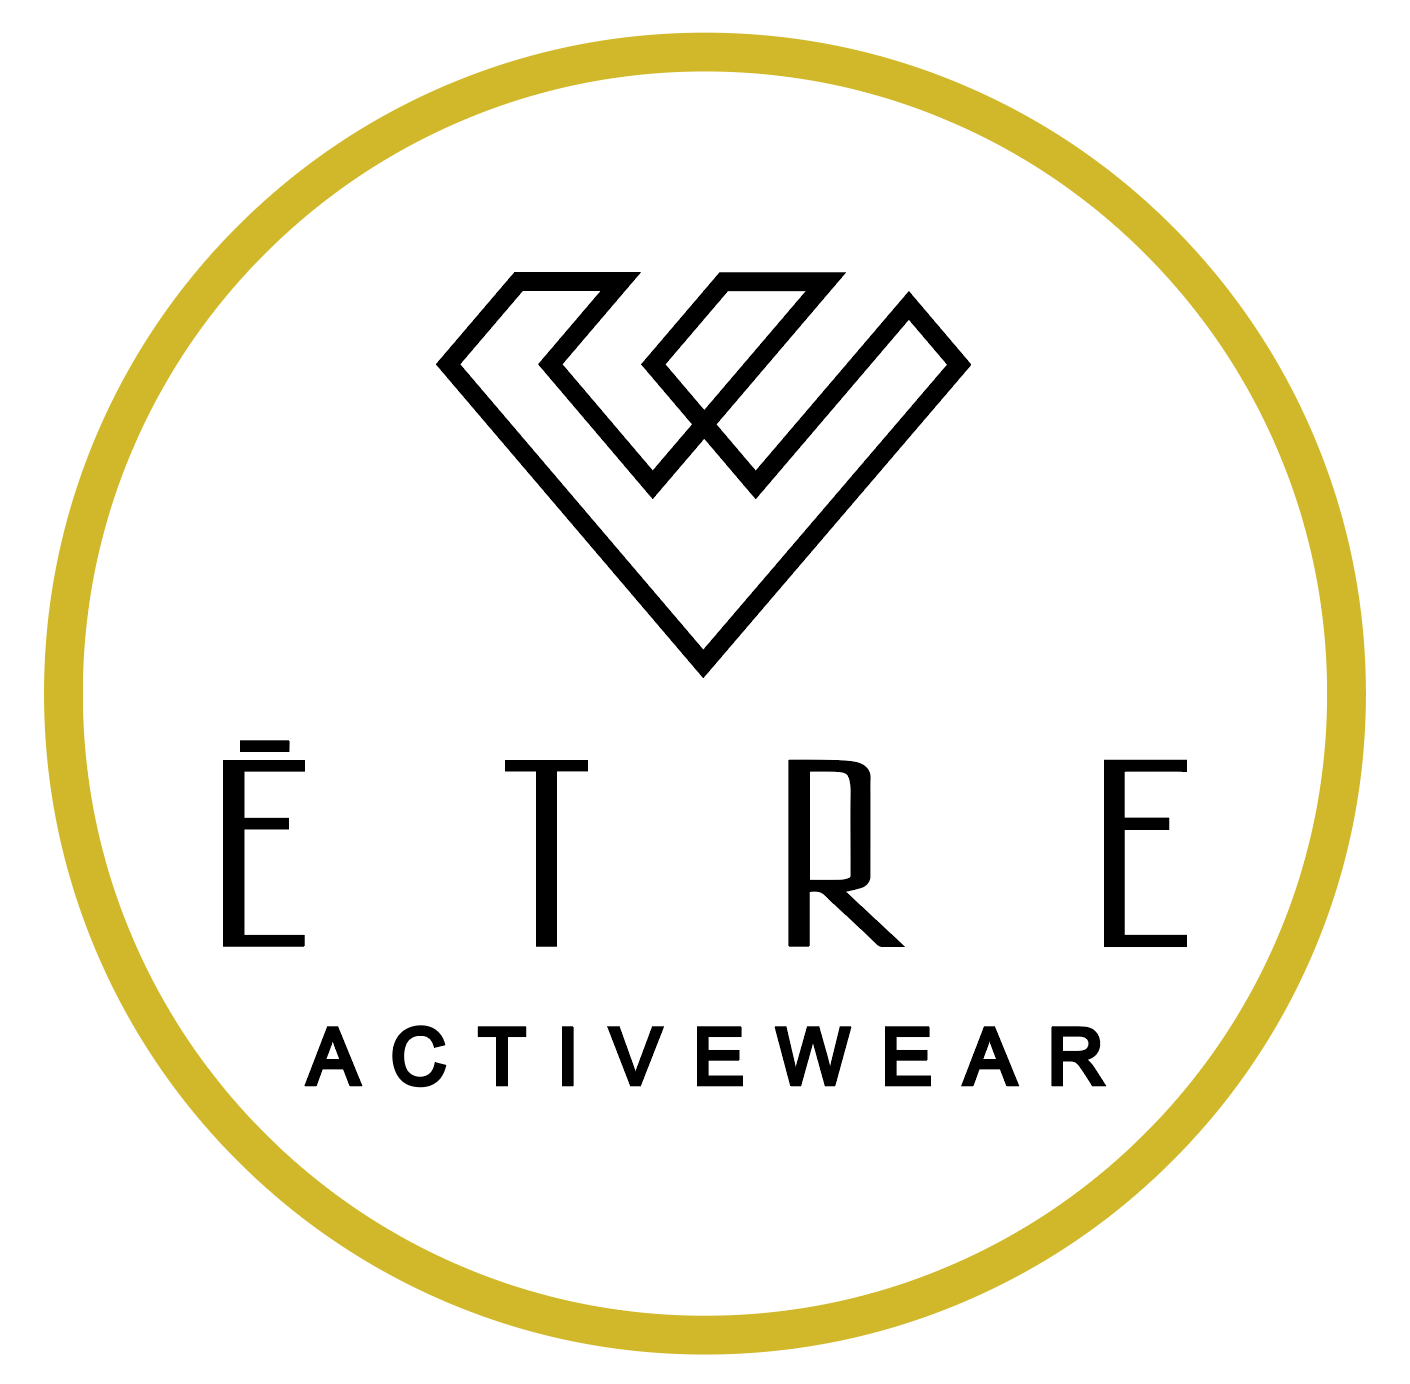 Custom Business Signage for Etre Activewear Business Sign - VividEditions